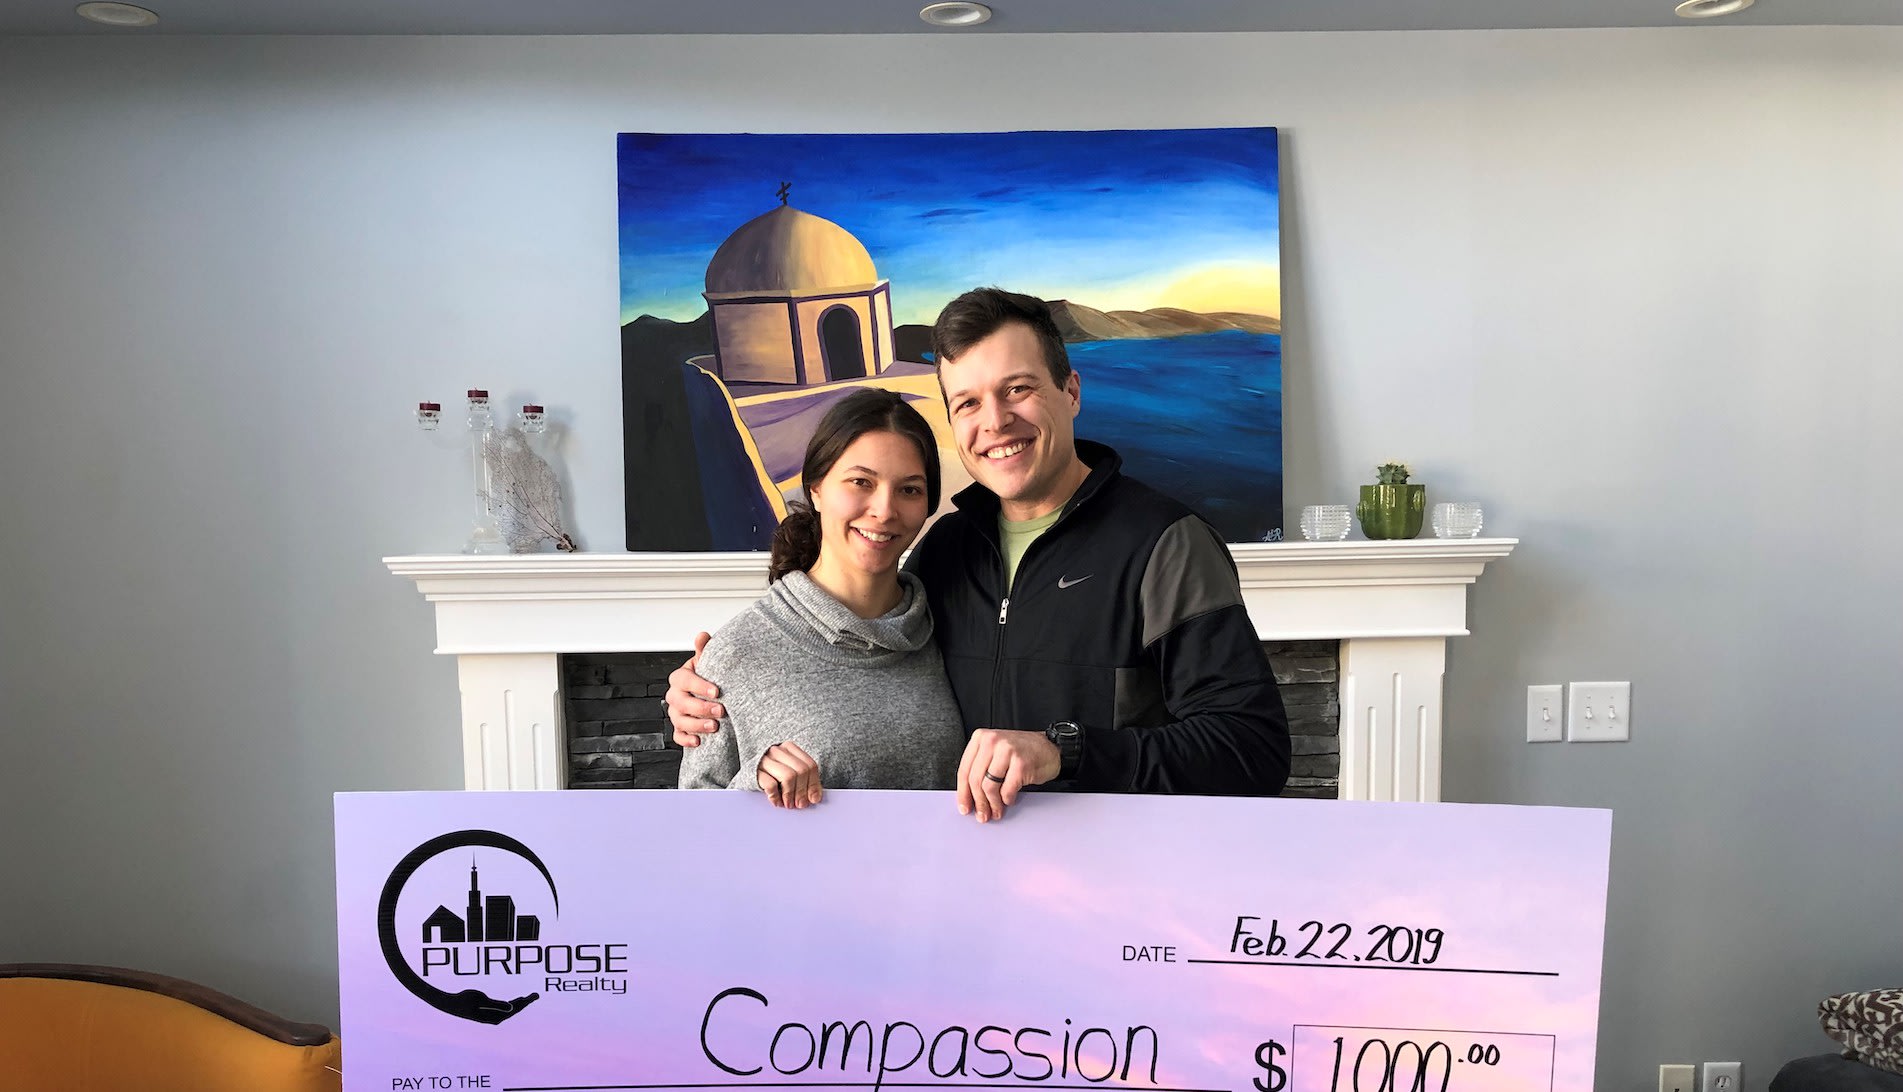 Man and woman smile, holding a cheque for Compassion.